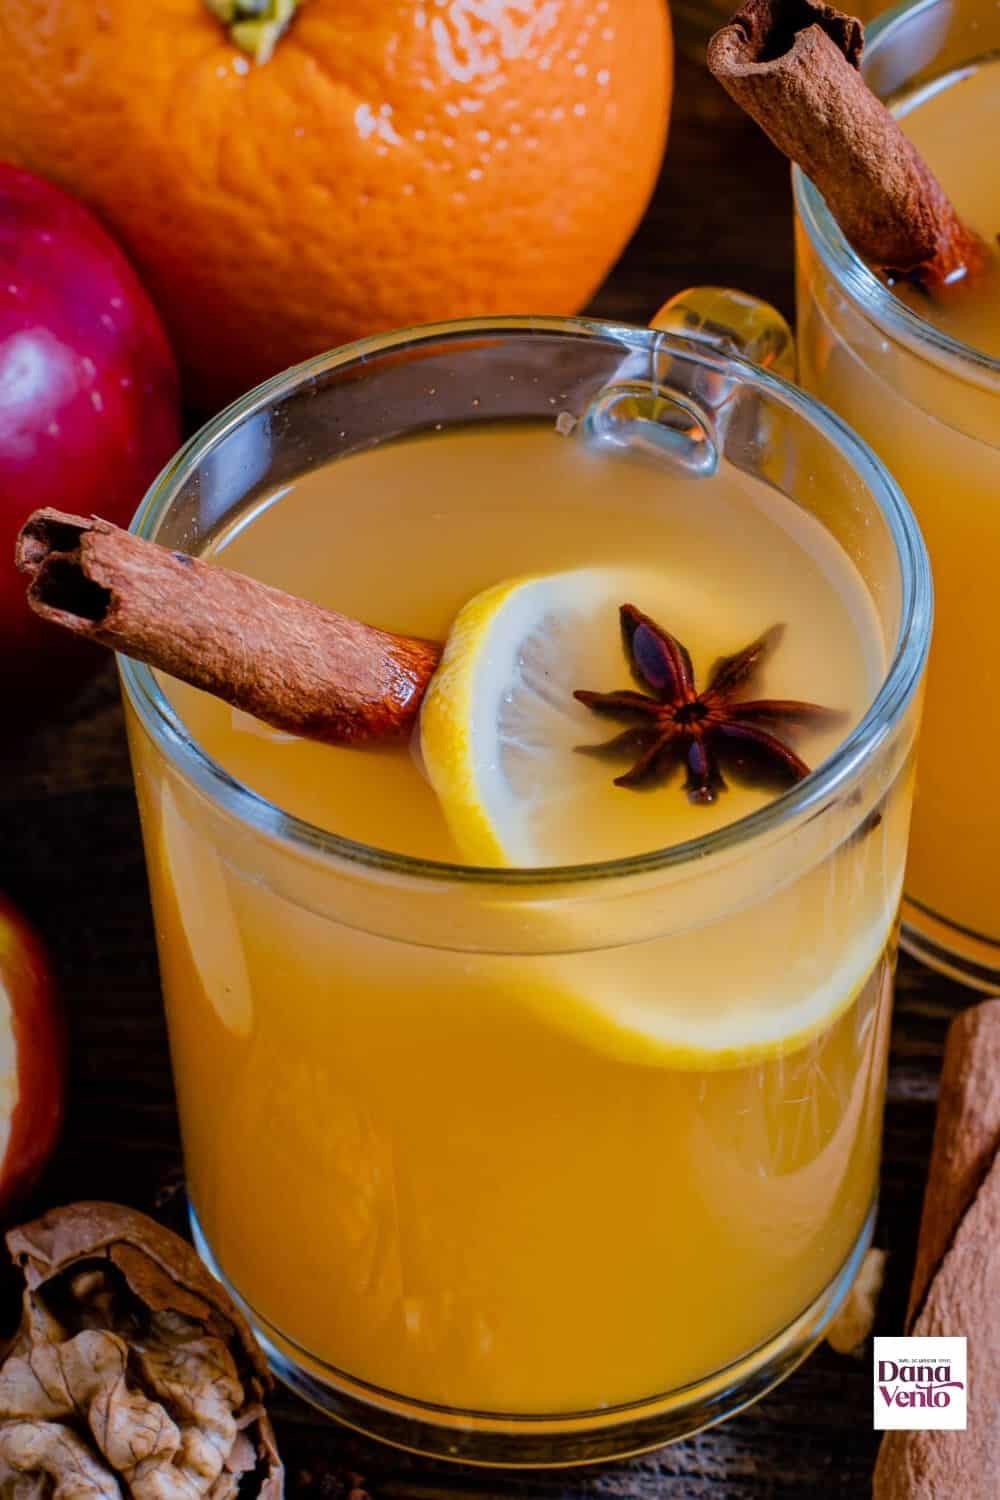 Spiced Mulled White Wine with anise star and cinnamon stick